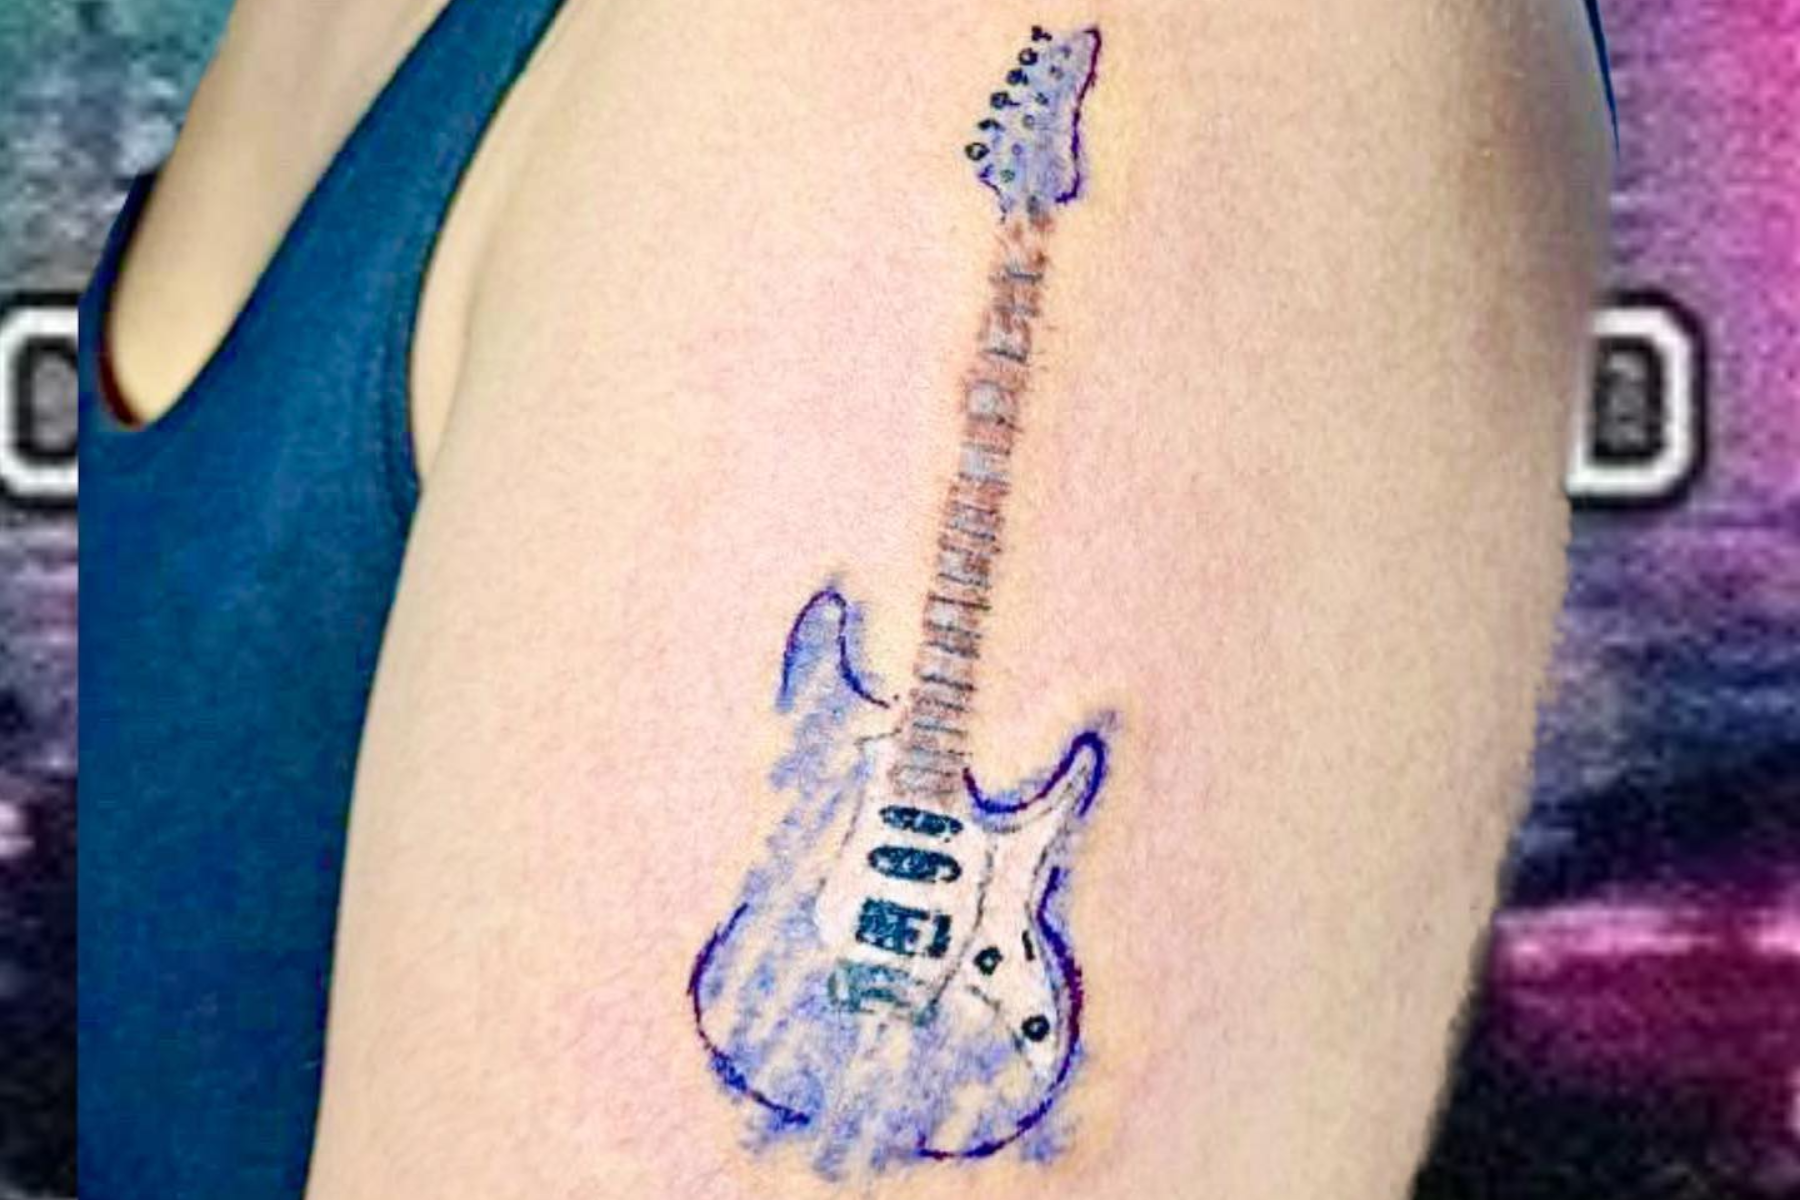 100+ Amazing Guitar Tattoo Ideas To Inspire Your Next Design | Guitar tattoo  design, Guitar tattoo, Tattoos for dad memorial